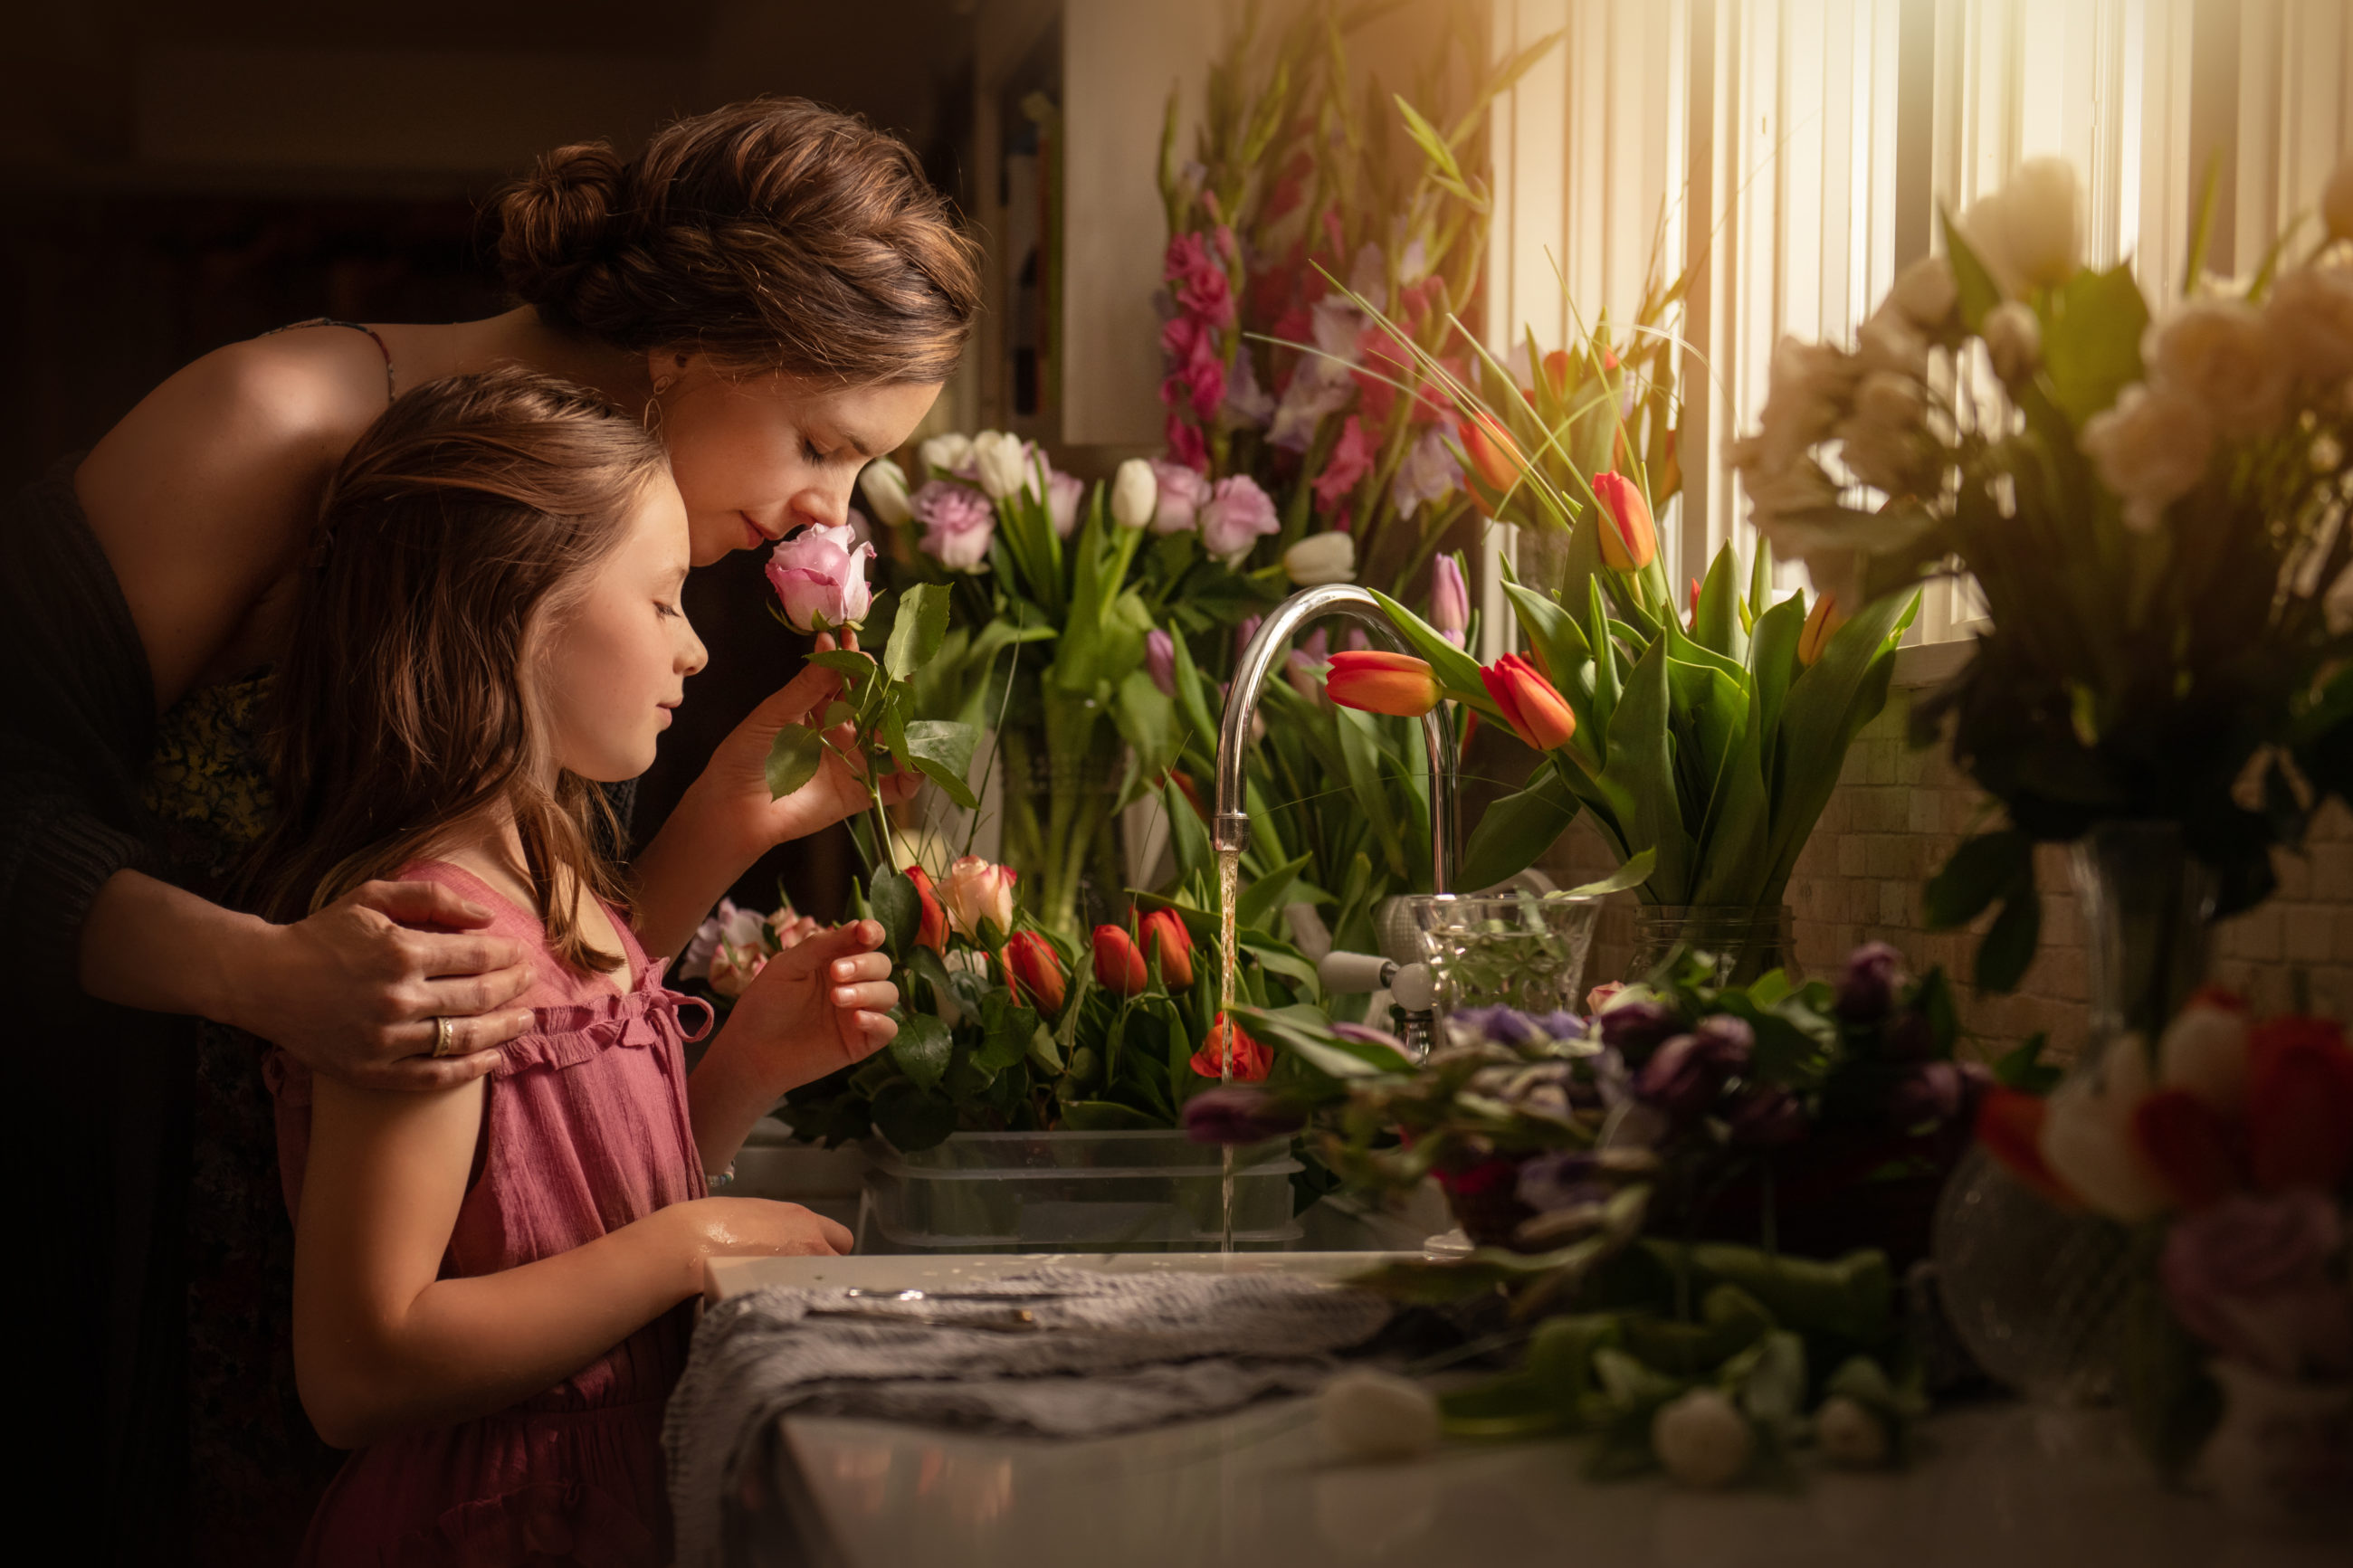 boulder Colorado photographer - mom and daughter smelling a hundred flowers in kitchen